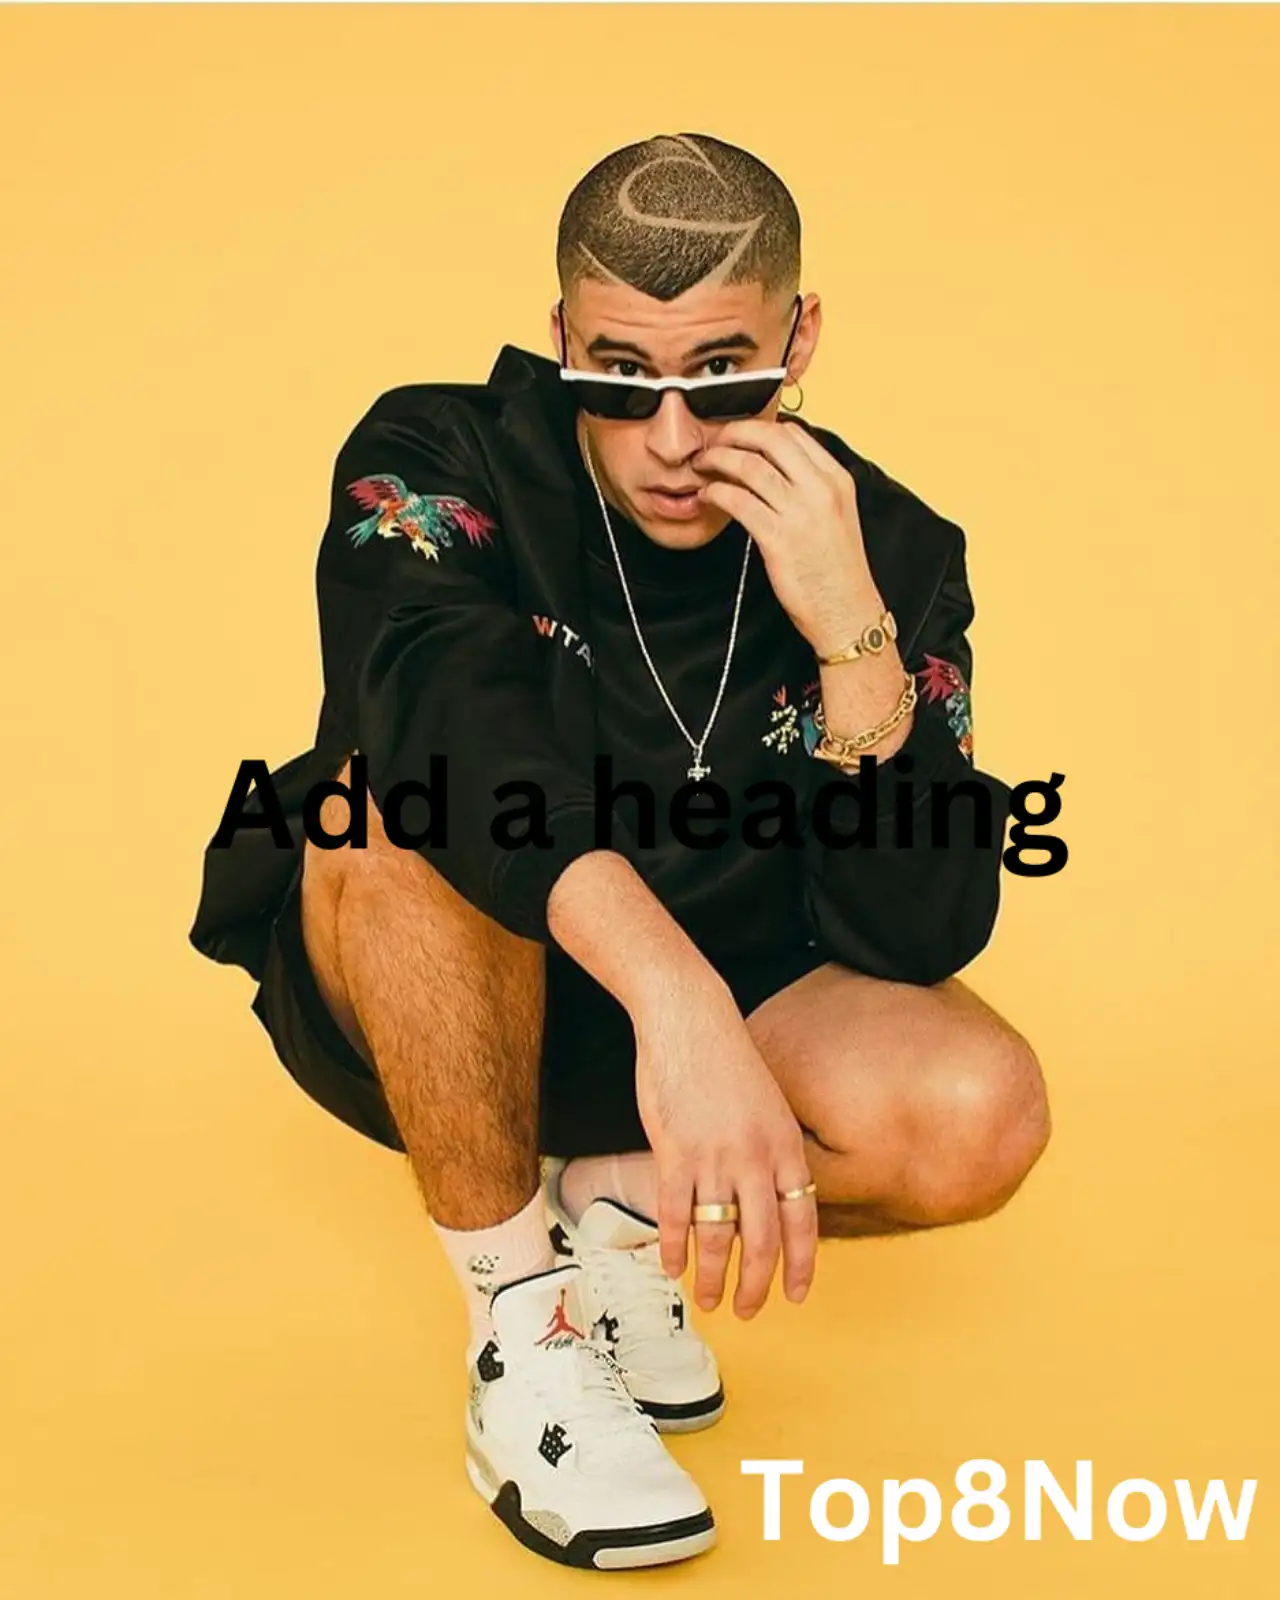 bad bunny net worth, Biography and Lifestyle